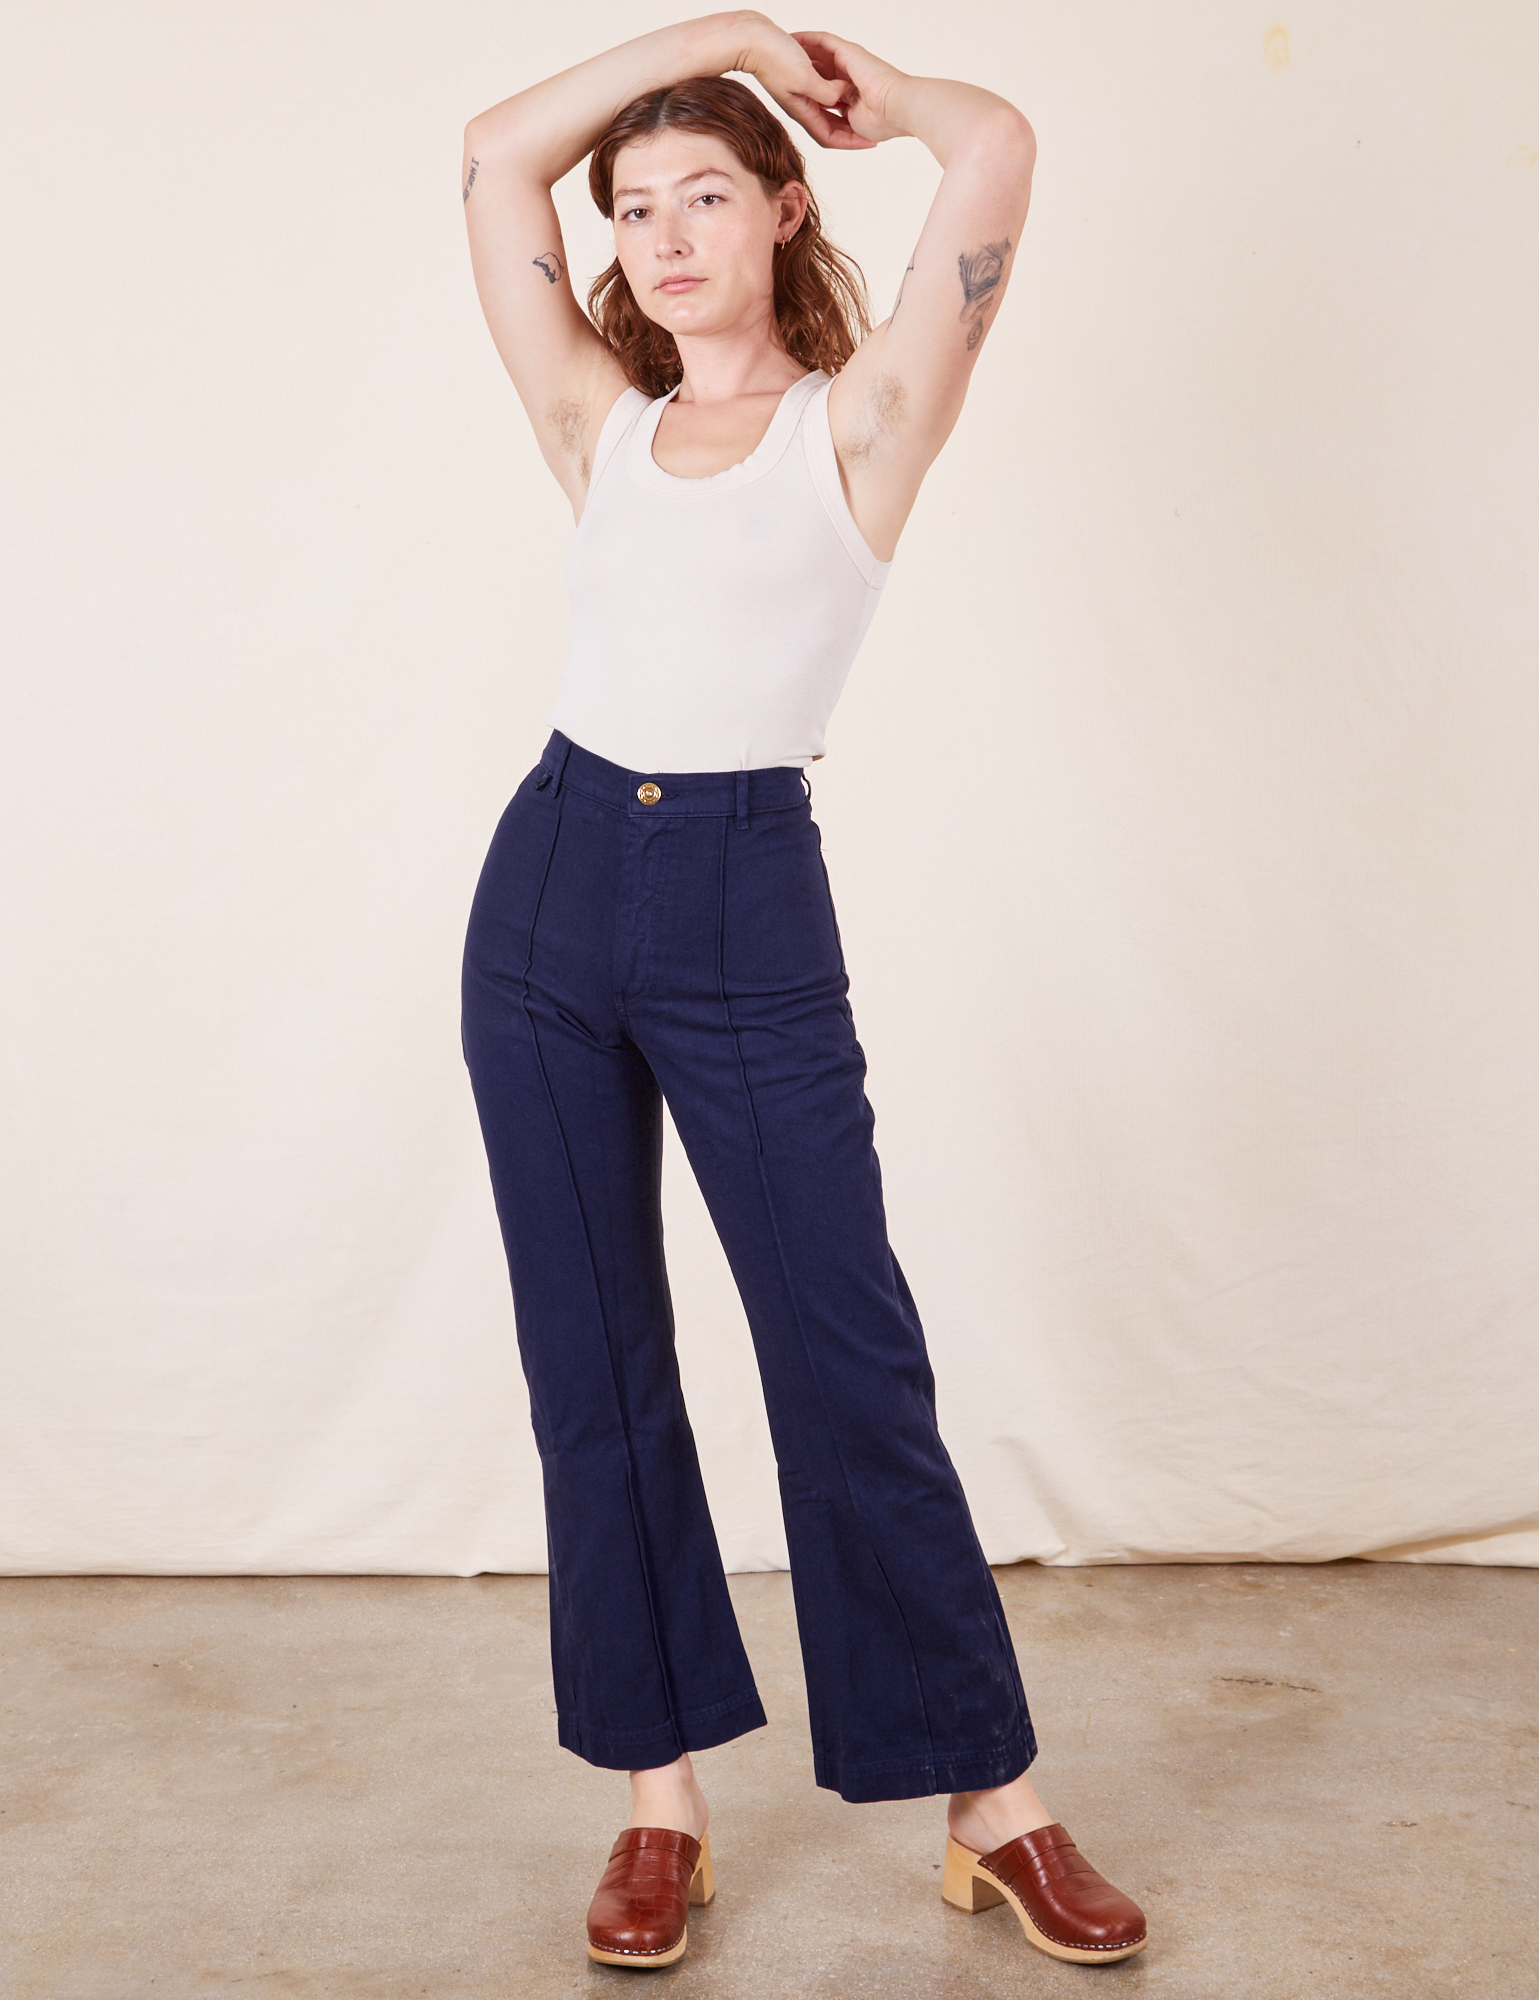 Alex is 5&#39;8&quot; and wearing XS Western Pants in Navy Blue paired with vintage off-white Tank Top